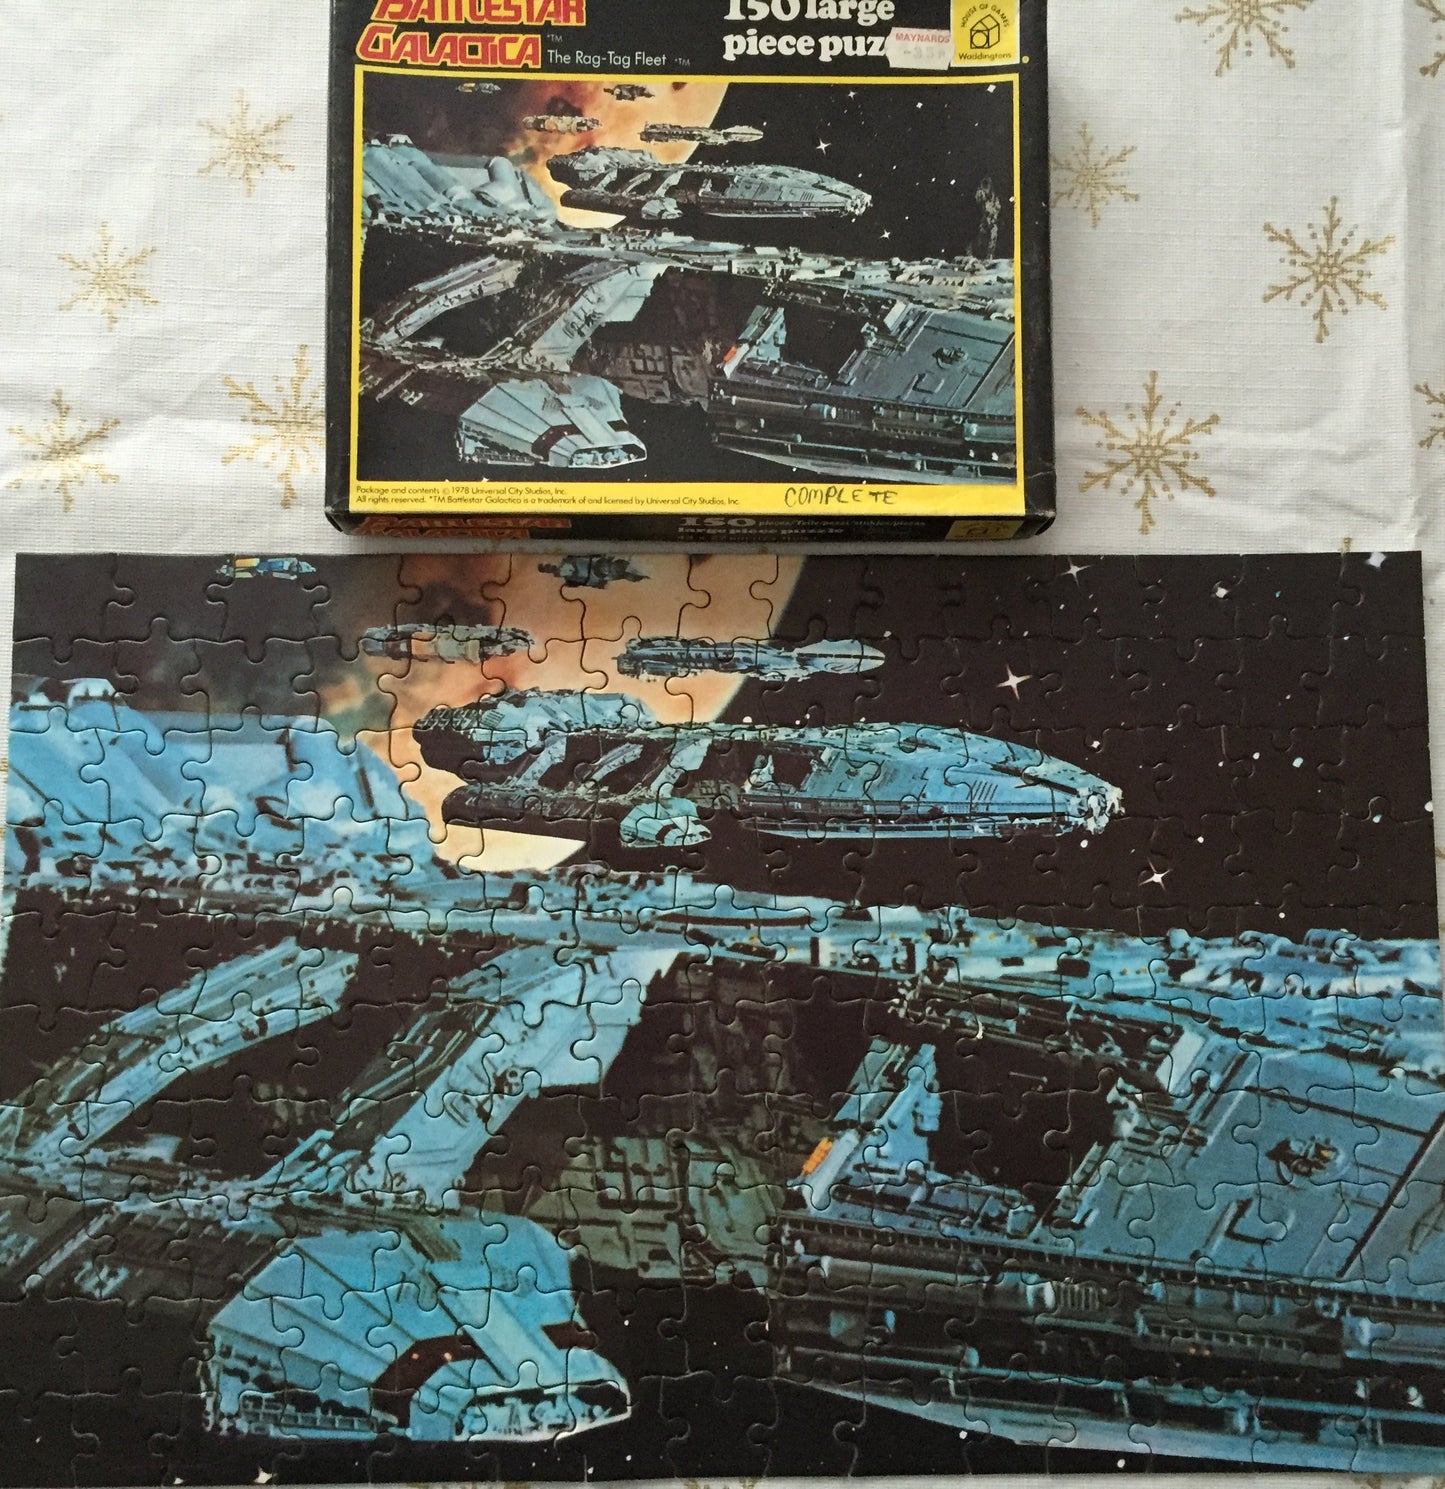 Battlestar Galactica Vintage 1978 Waddingtons 150 Large Piece Jigsaw Puzzle Number 138C The Rag-Tag Fleet Complete In The Original Box